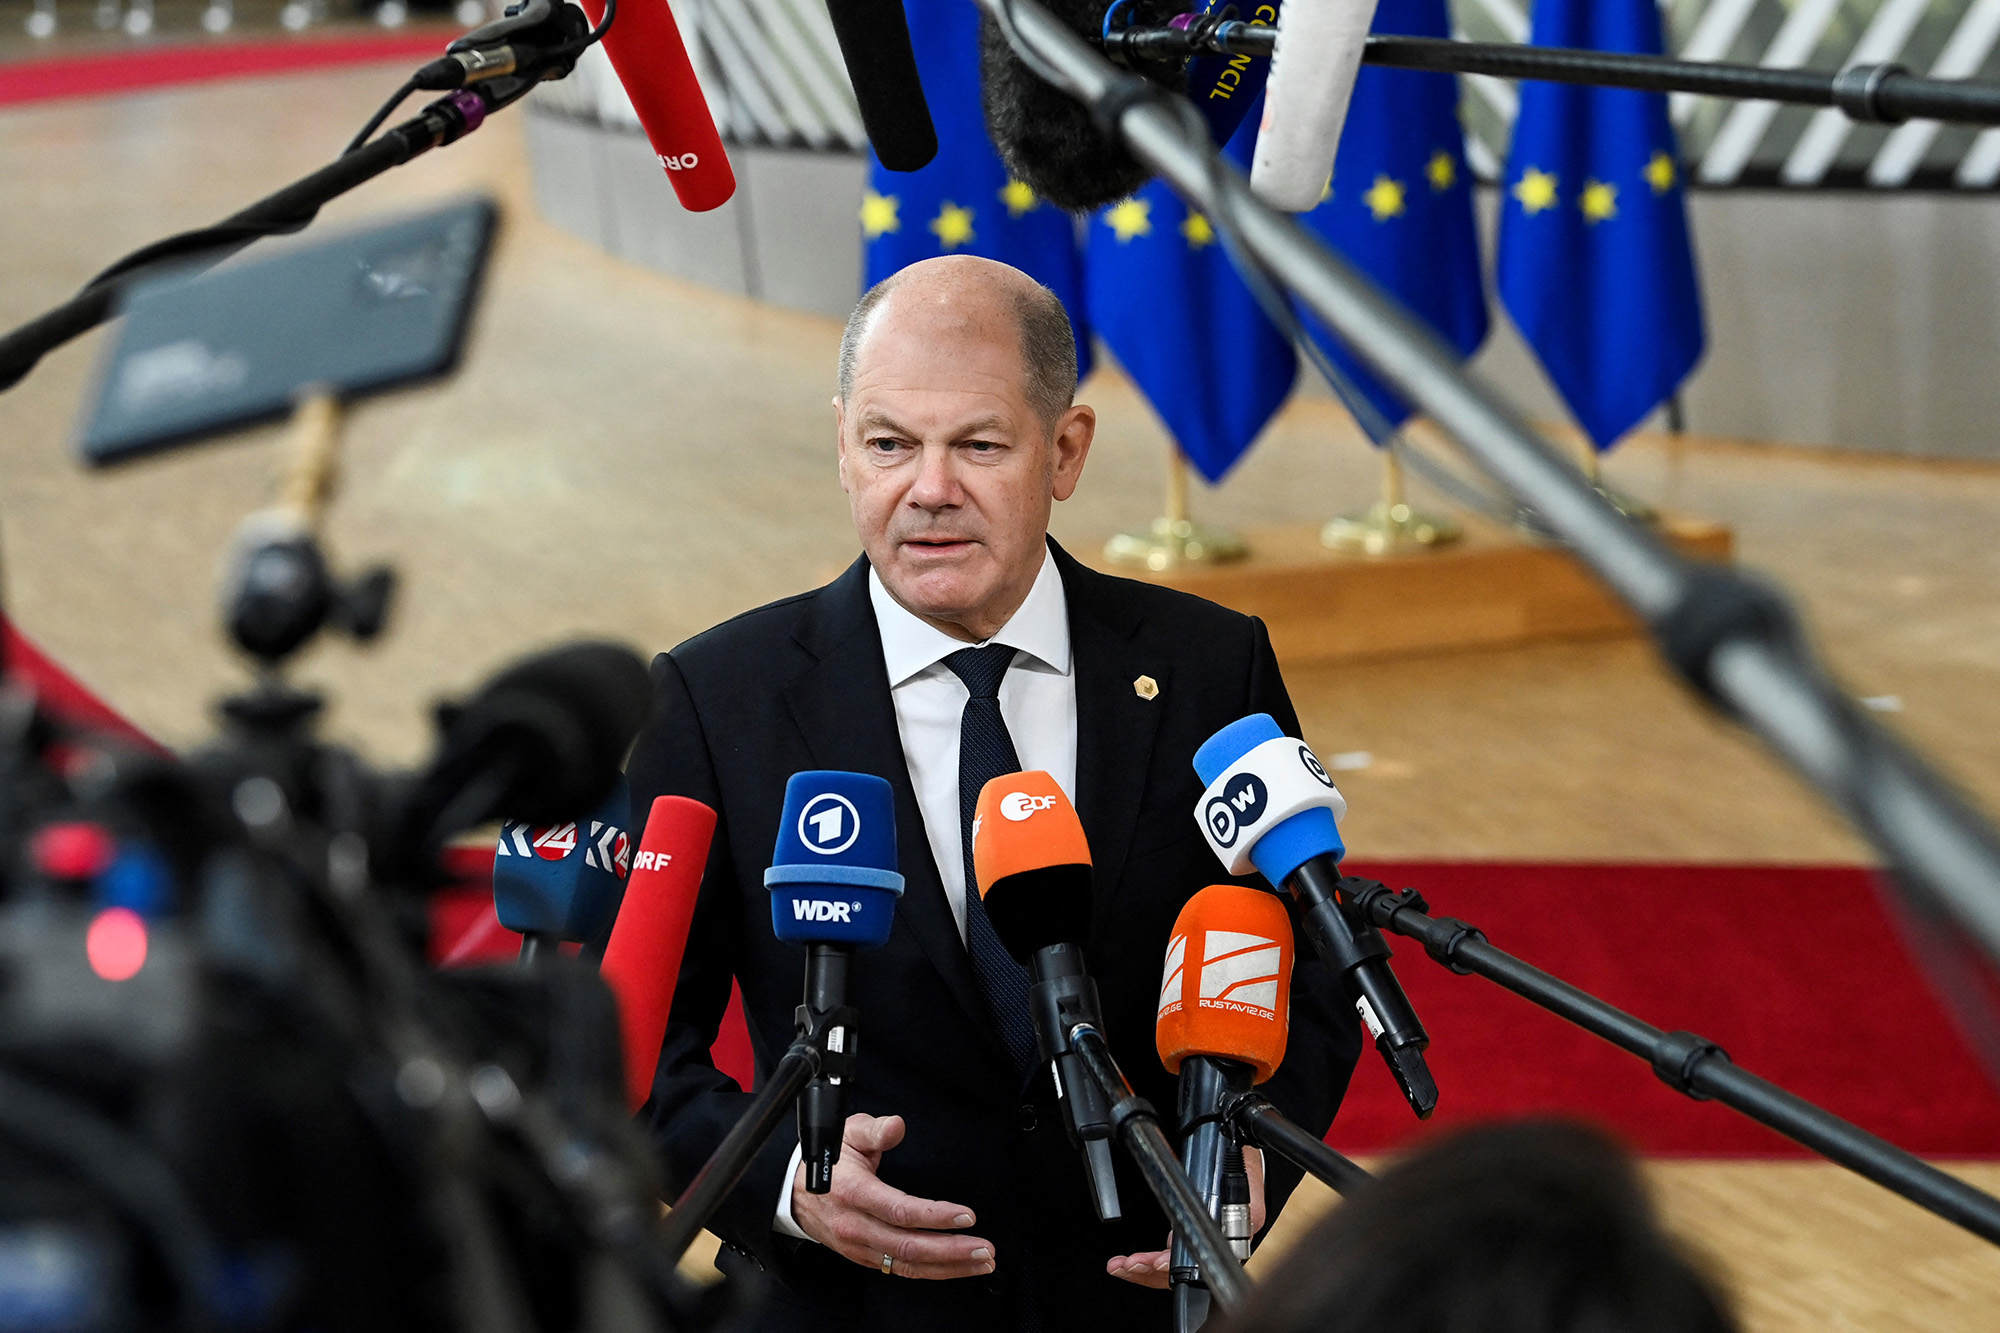 Germany's Chancellor Olaf Scholz answers journalists' questions as he arrives for a summit at EU parliament in Brussels, Belgium, on February 9.